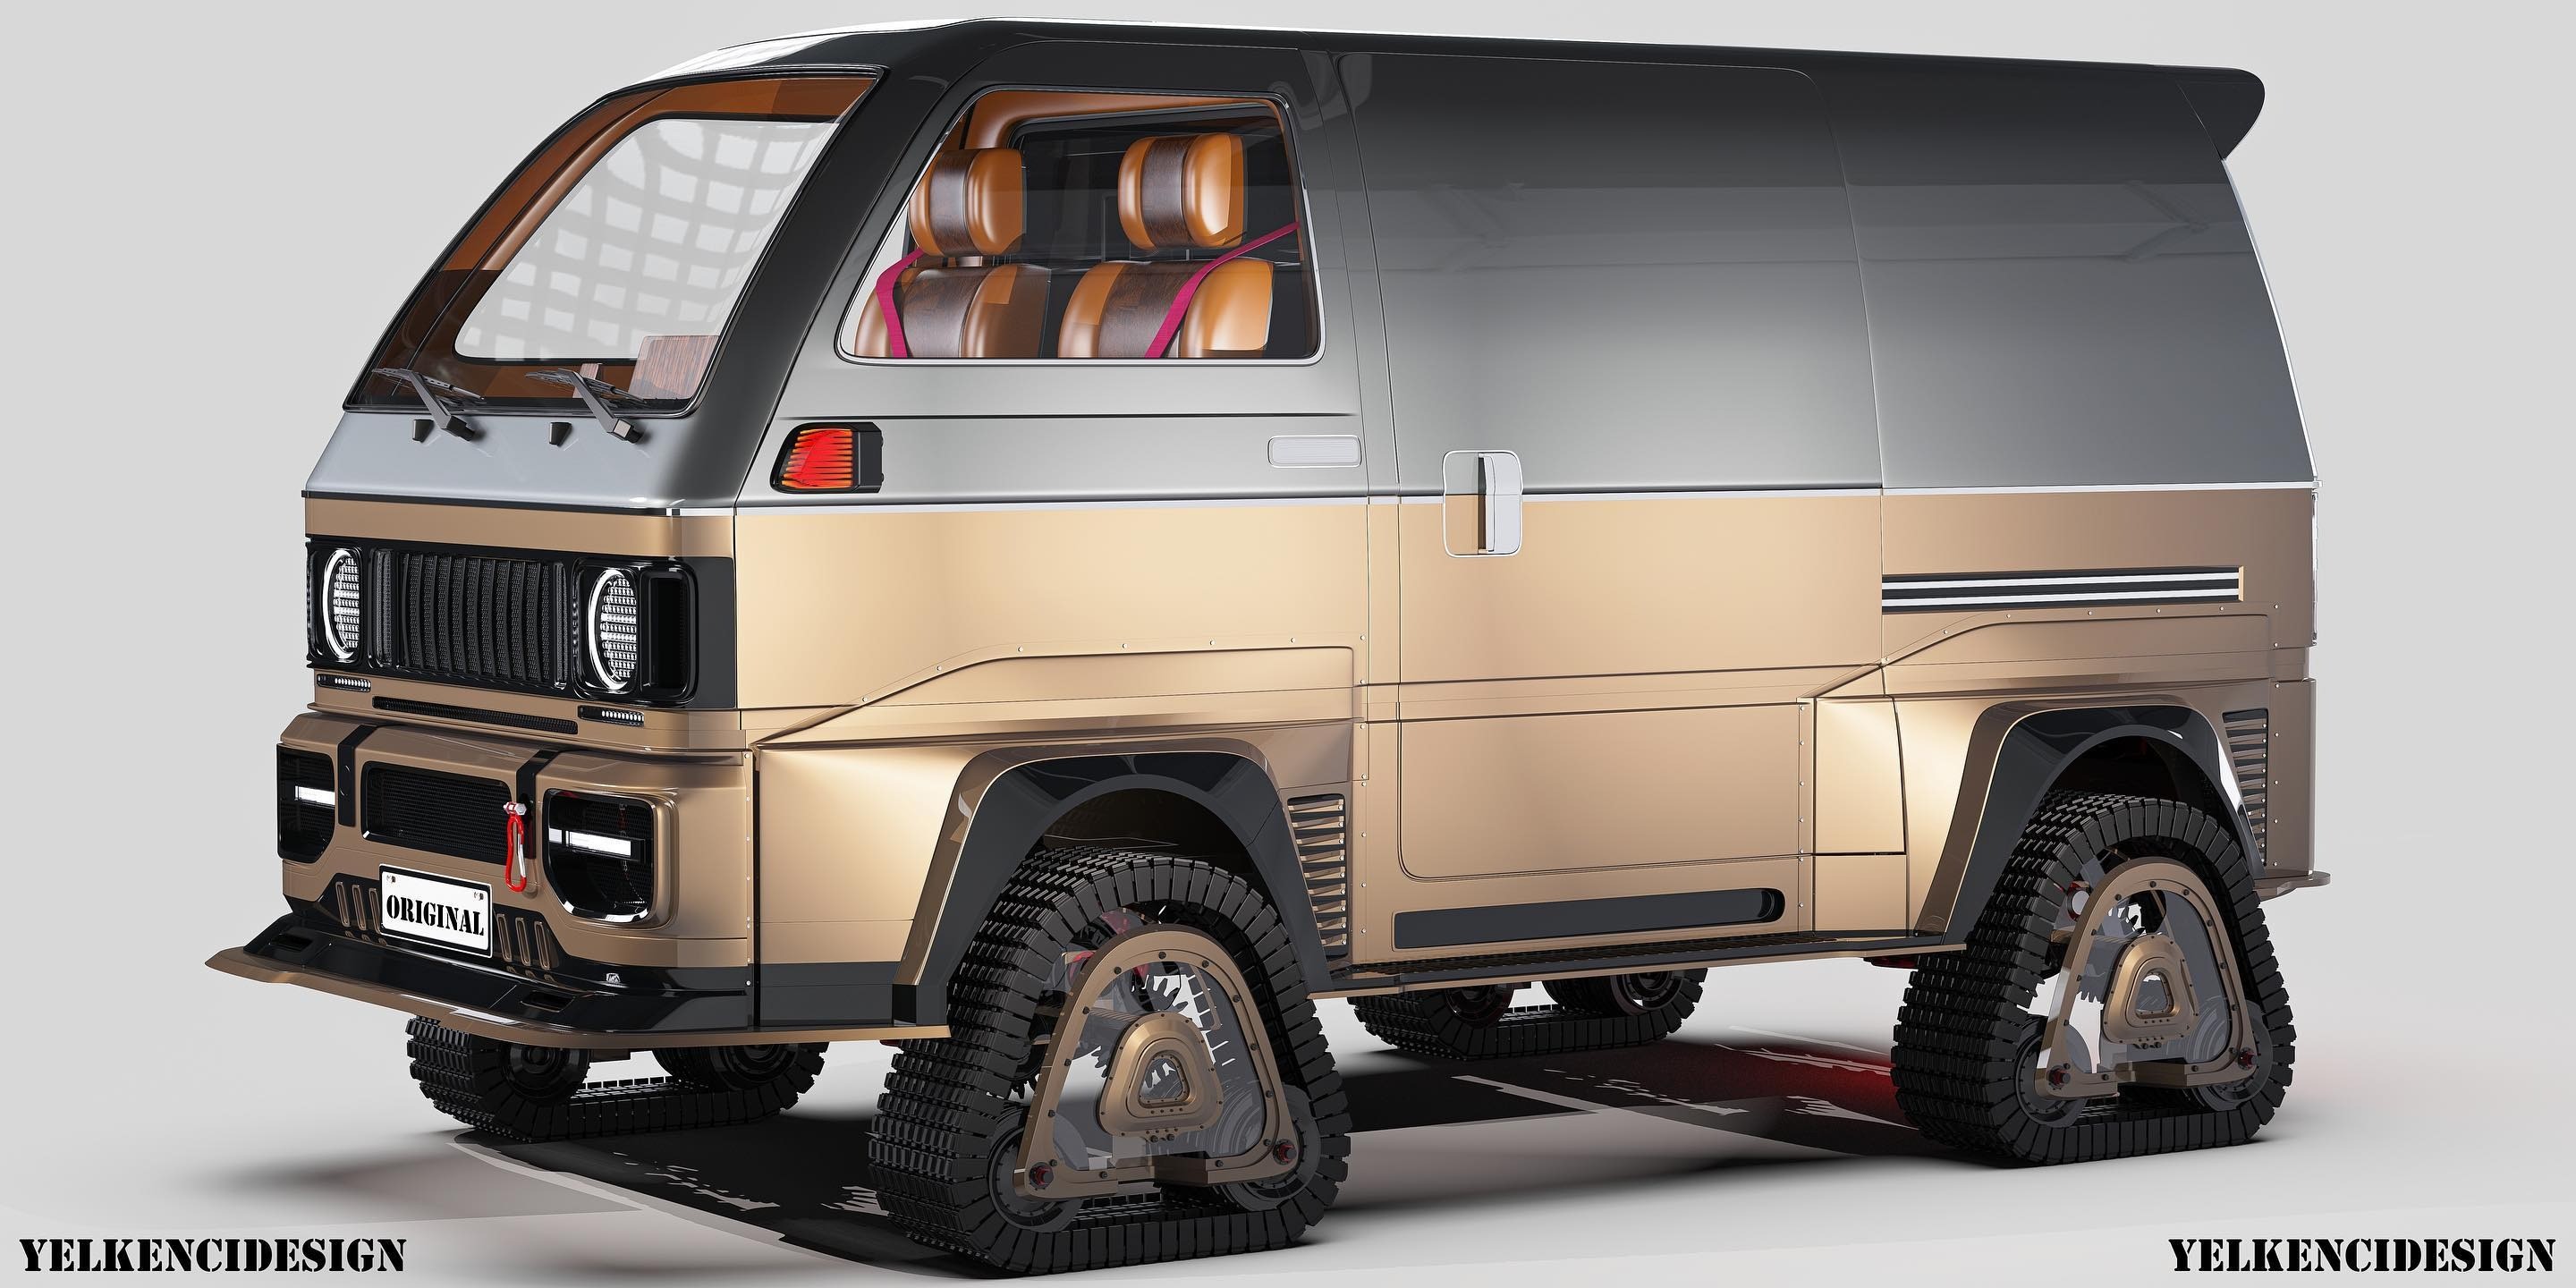 Suzuki Carry Kei Truck Morphs Into Unusual, HighDetail 3D Electric Design Project autoevolution